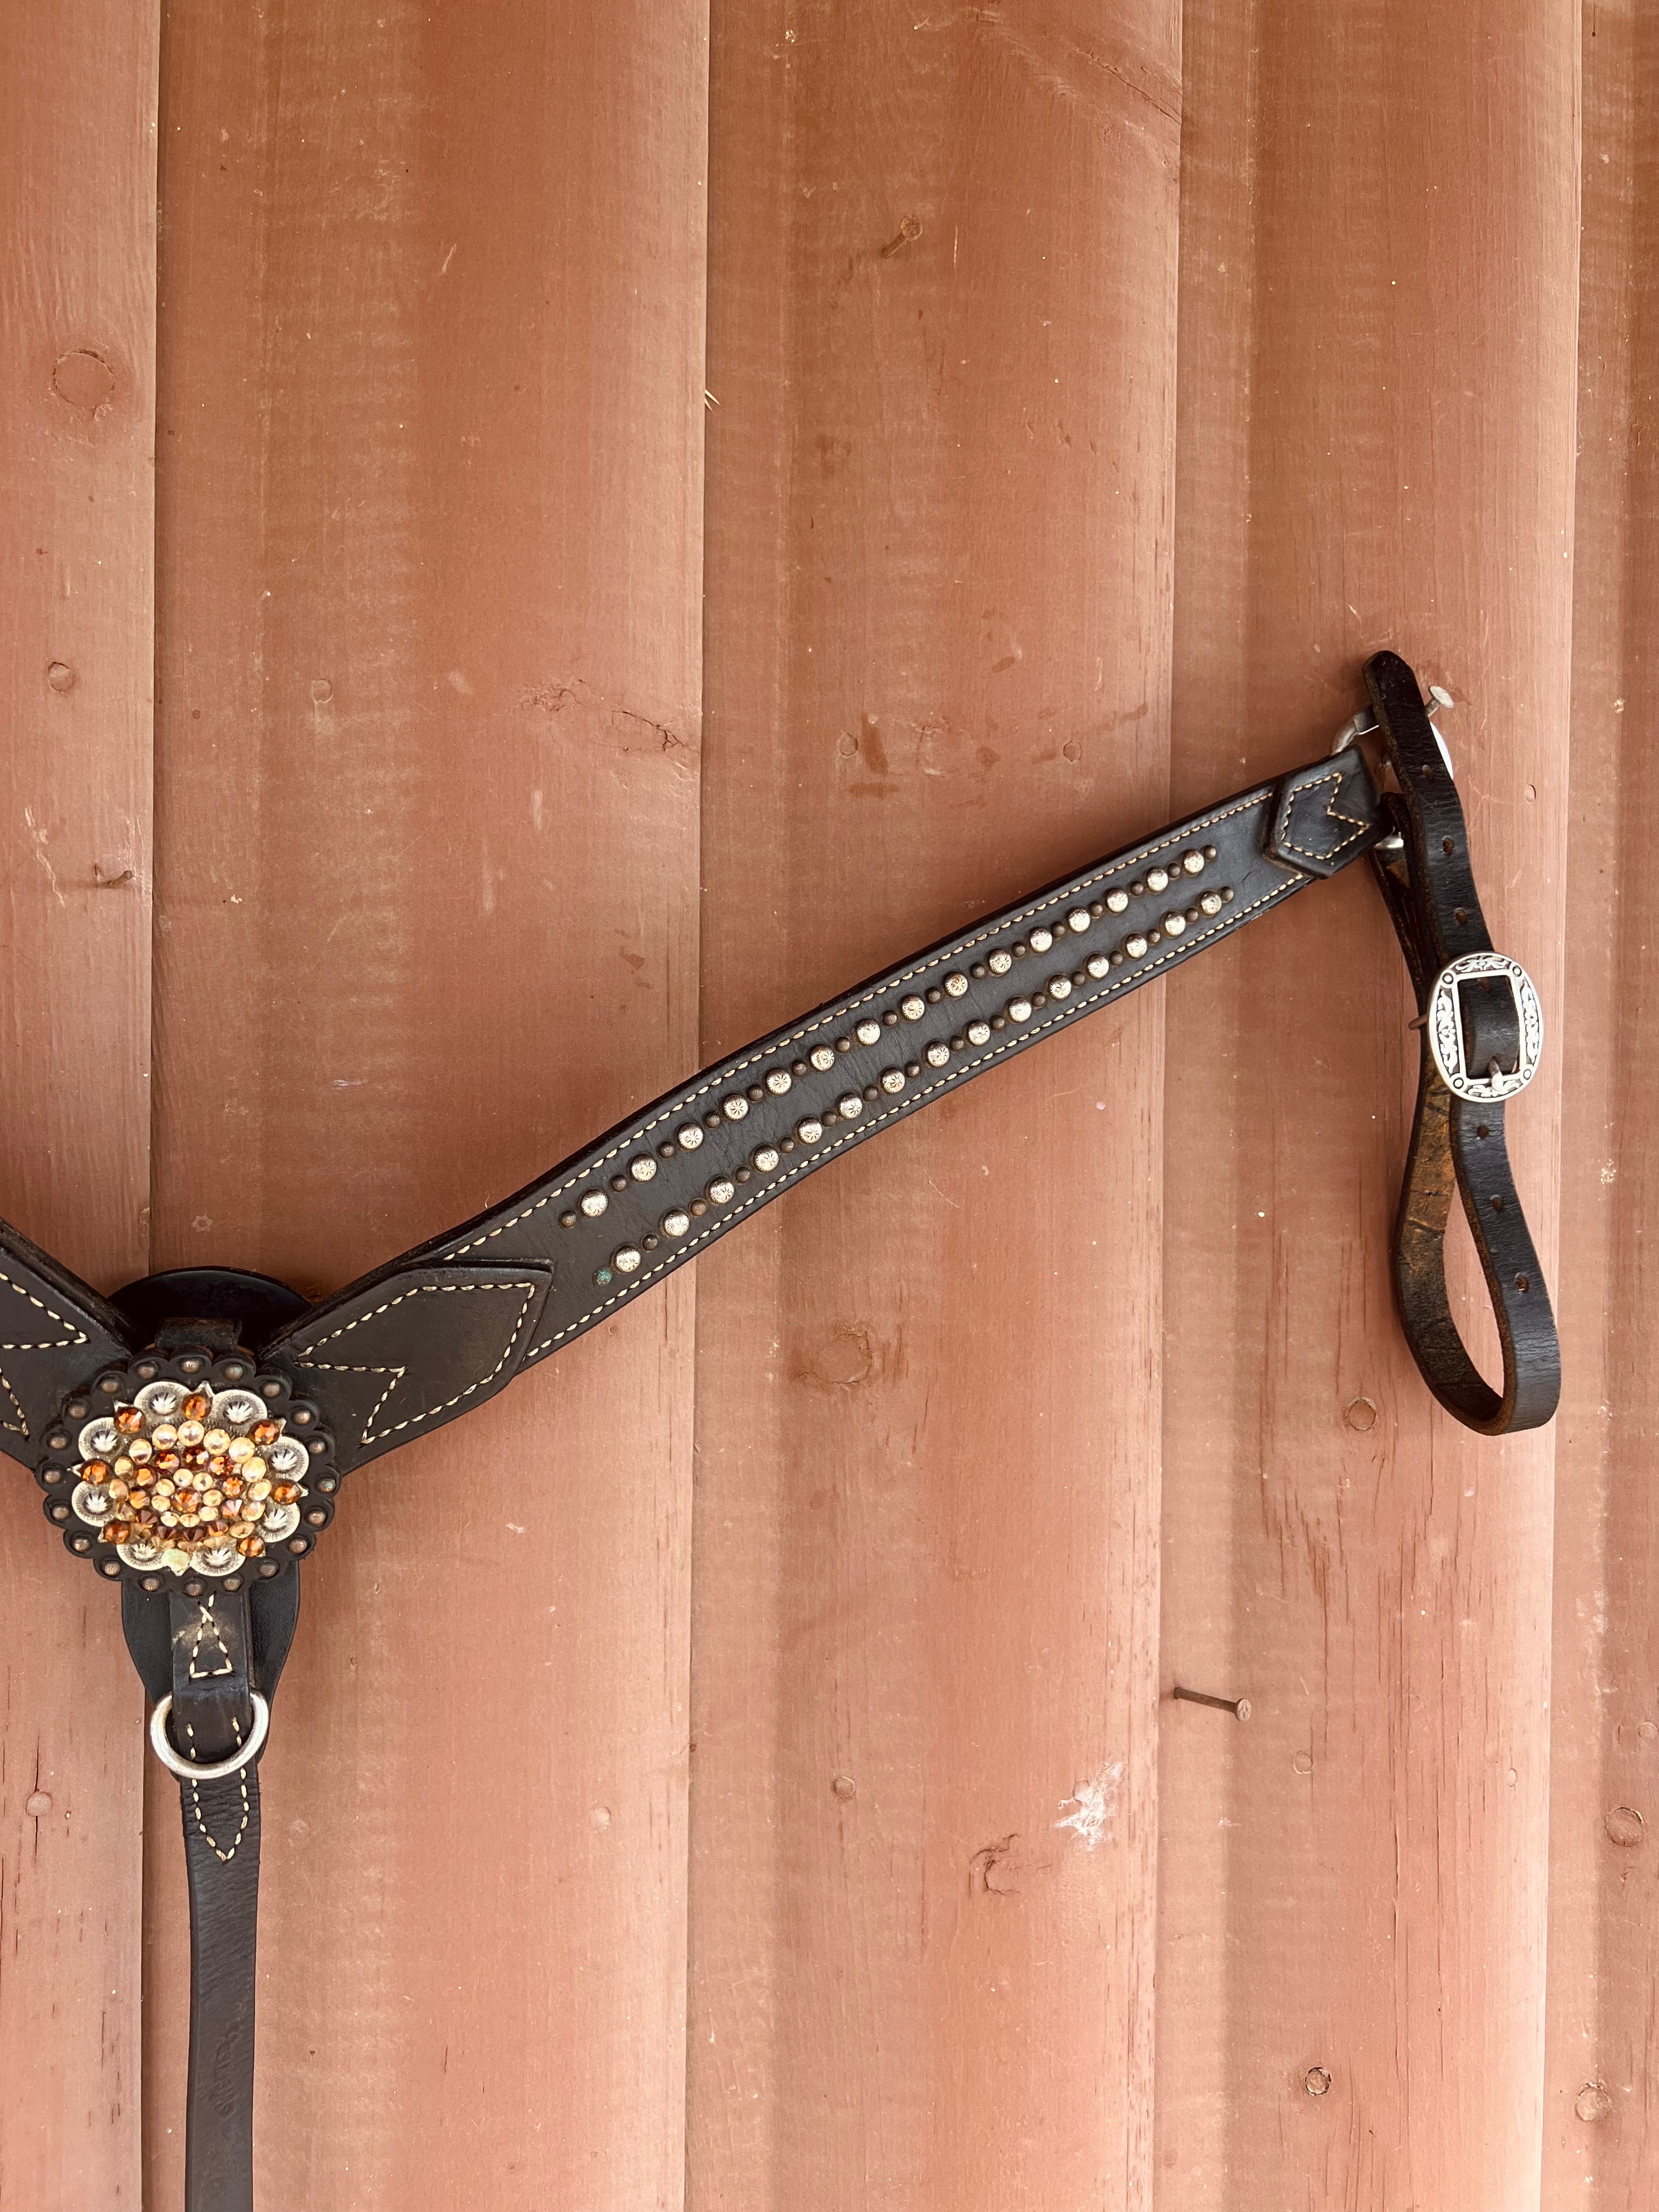 Studded Breast Collar - Black Leather with Large Center Concho